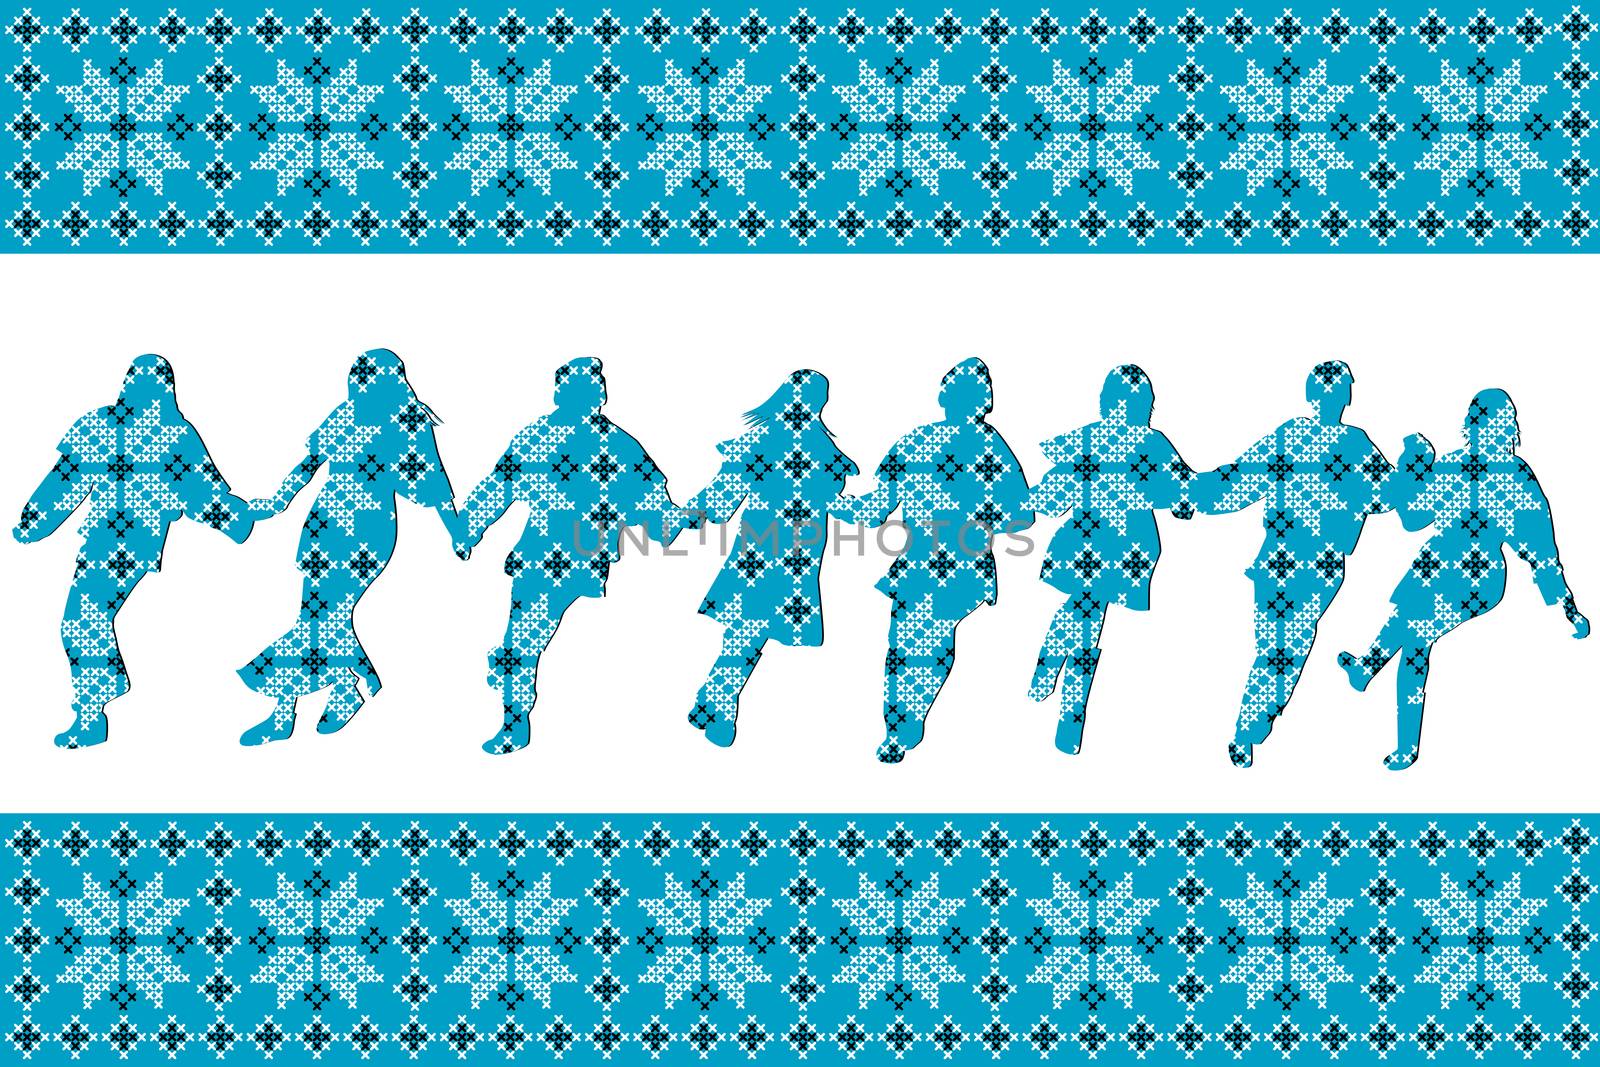 Blue ethnic motifs background with traditional dancers silhouettes